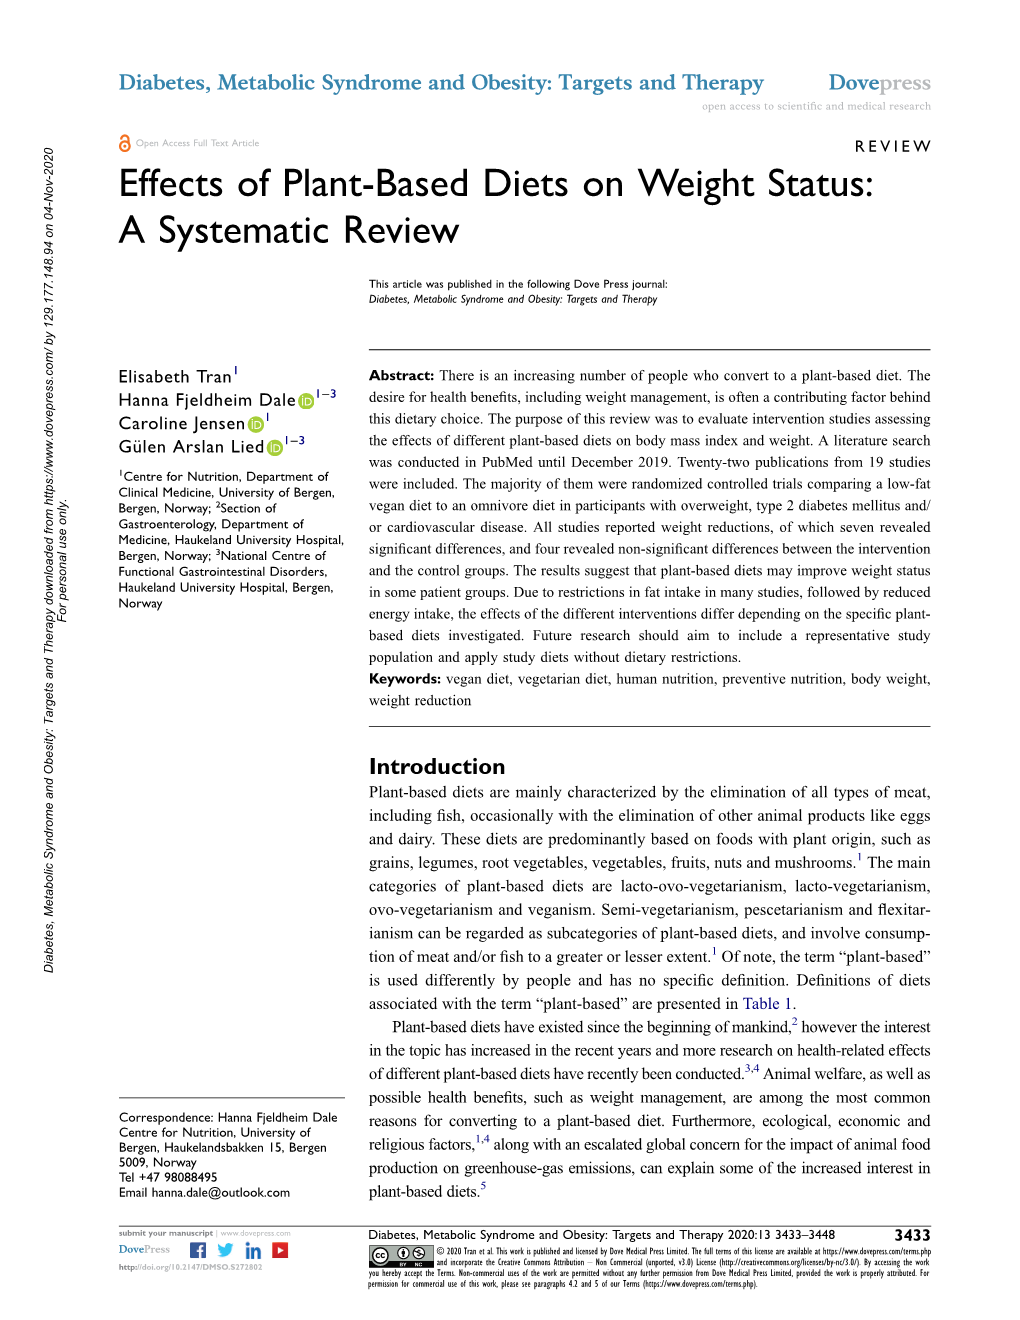 Effects of Plant-Based Diets on Weight Status: a Systematic Review